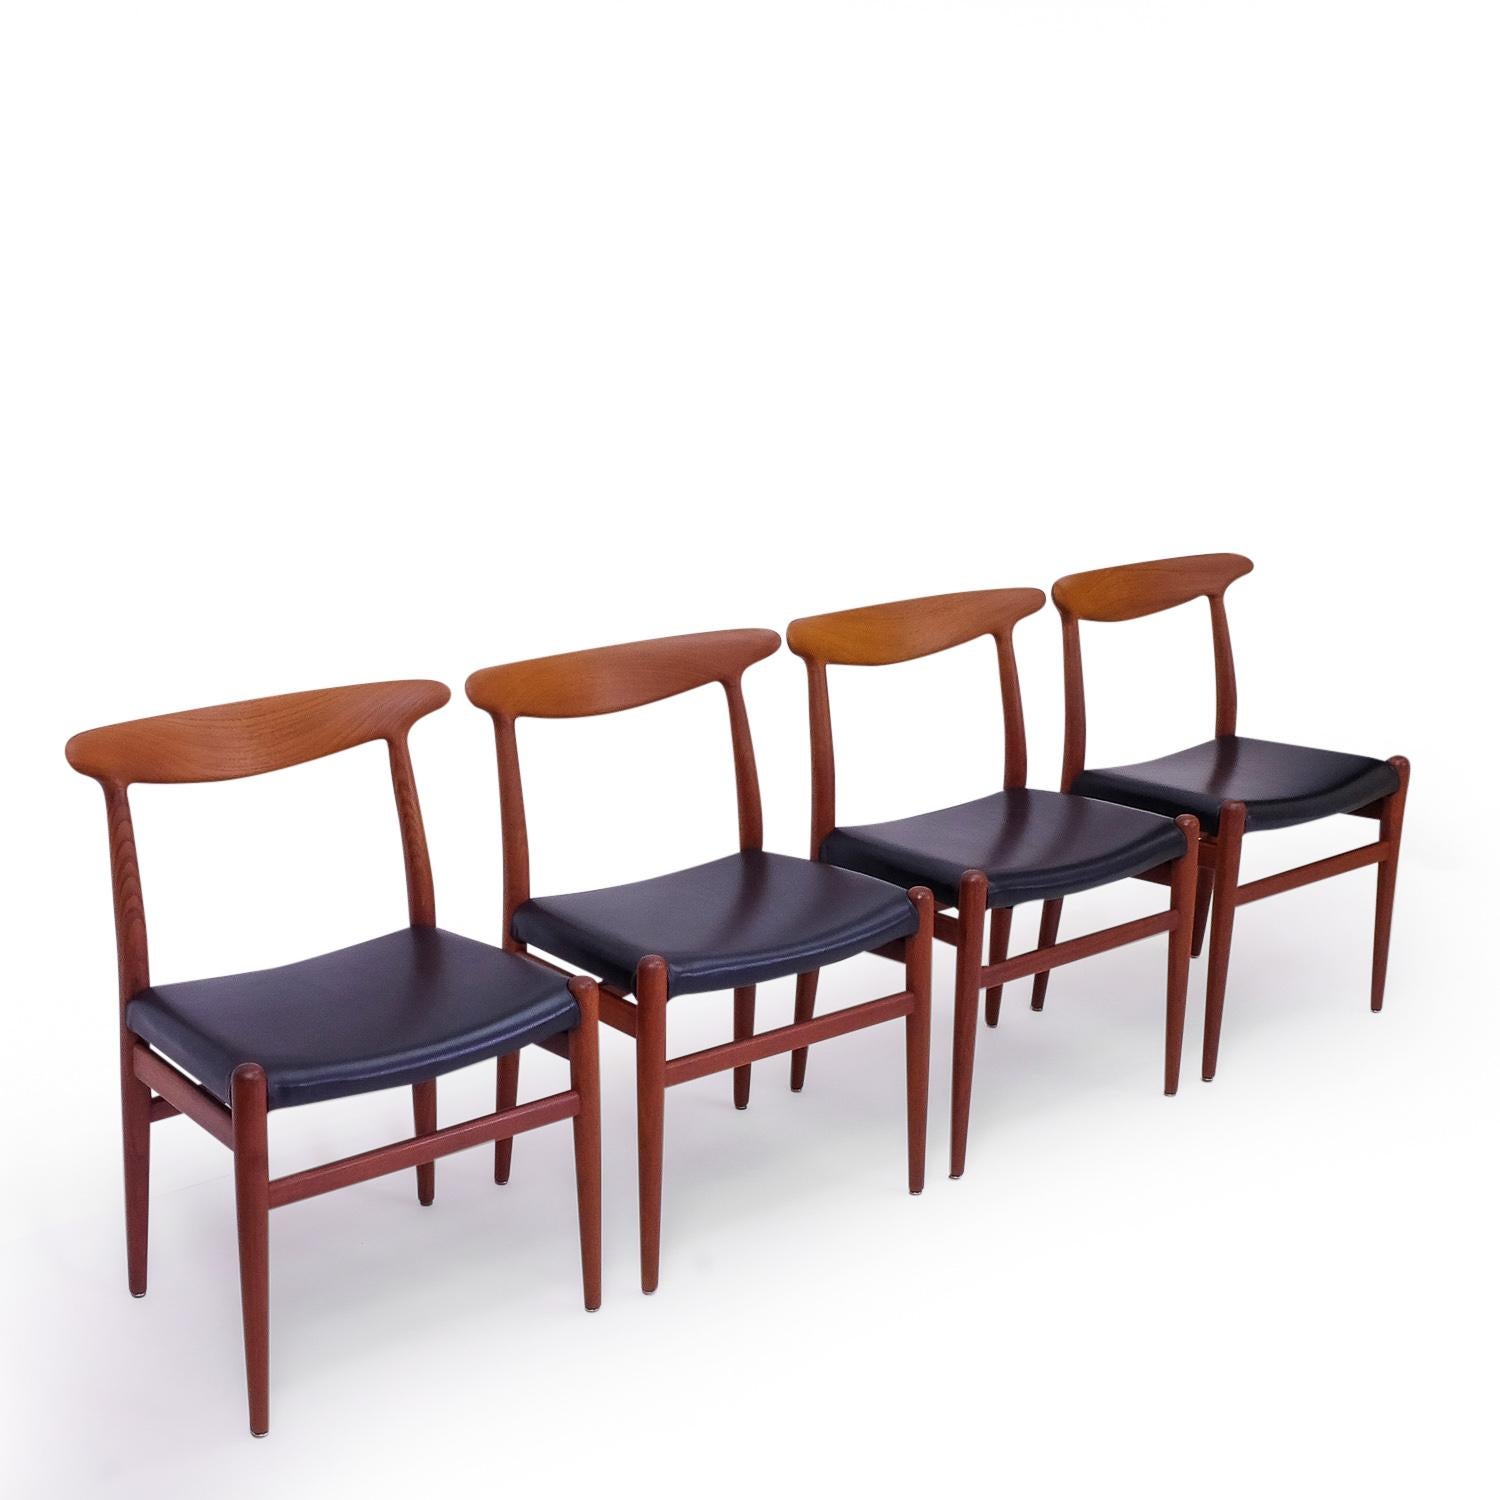 Hans Wegner W2 Chairs in Teak, Set of 4 In Good Condition For Sale In Bern, CH